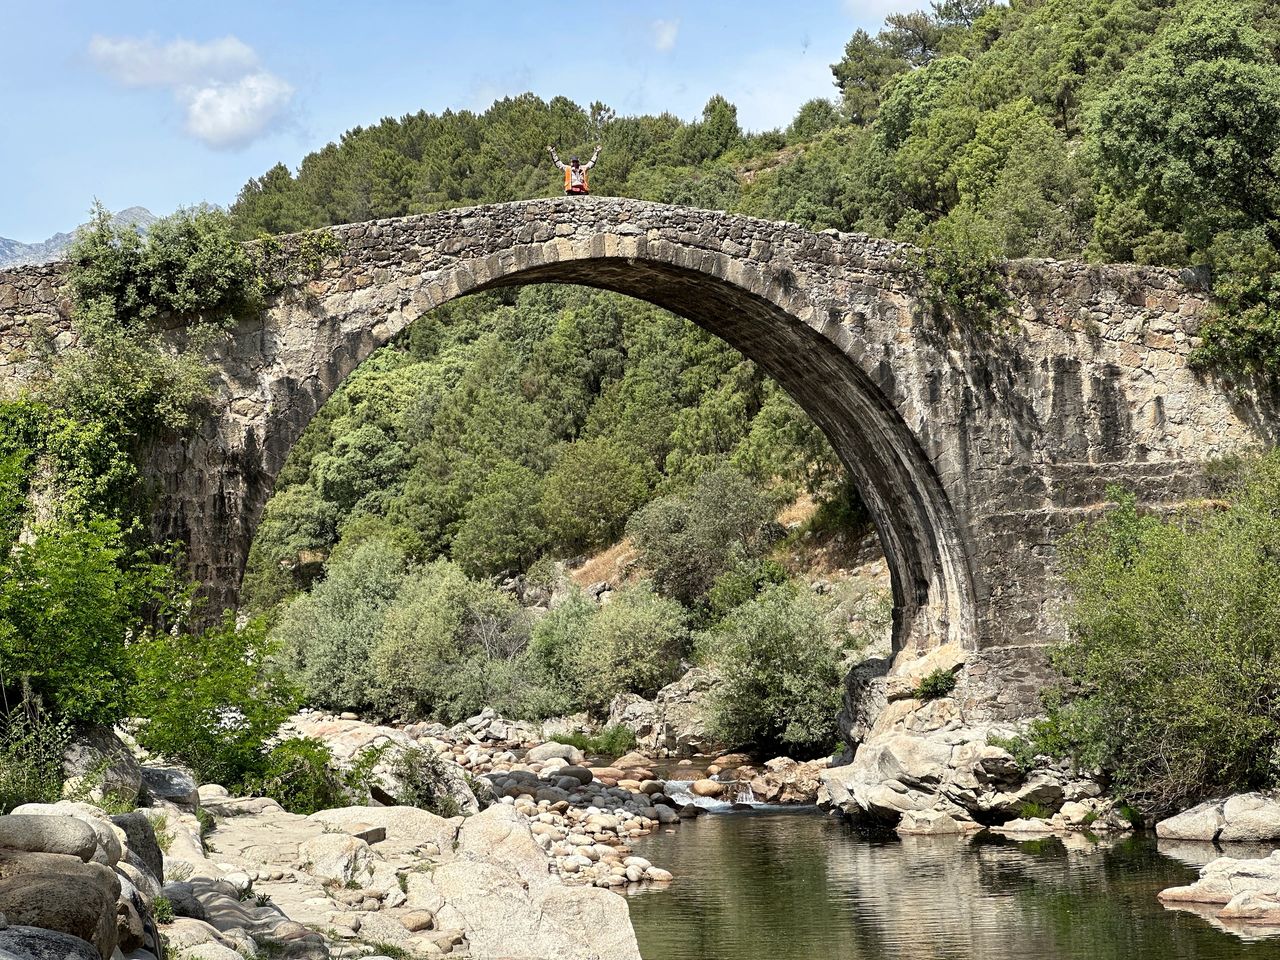 We stopped in the small town of Madrigal de la Vera to check out this old Roman bridge by a popular swimming hole.